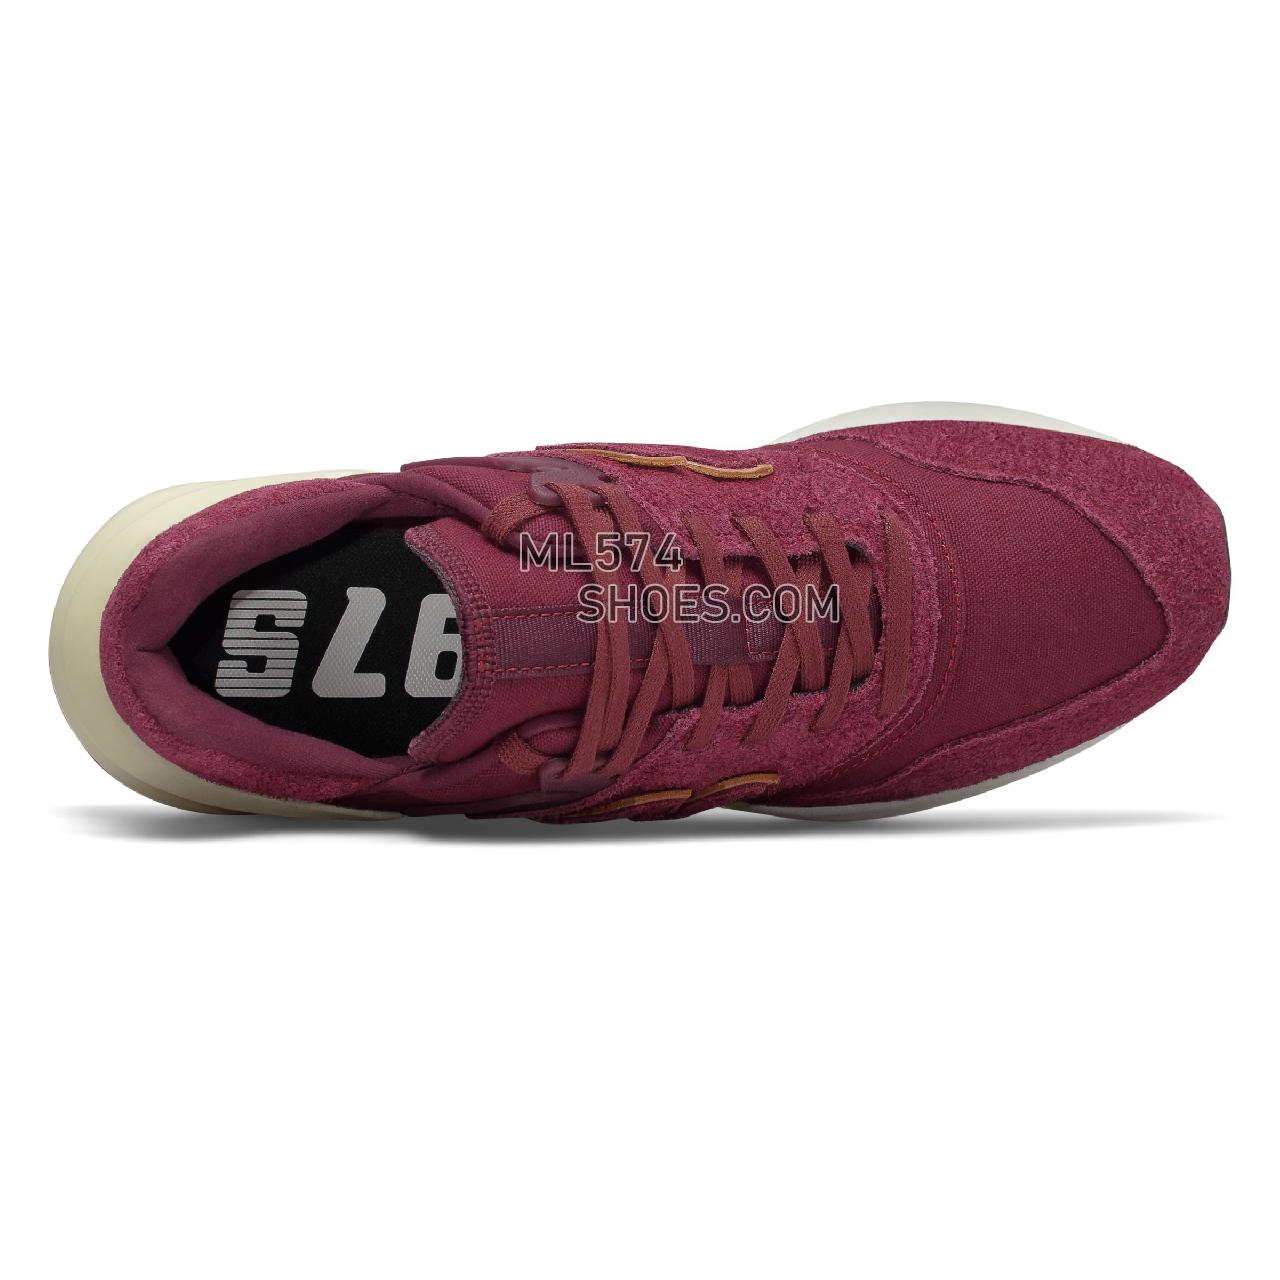 New Balance 997 Sport - Men's Sport Style Sneakers - Classic Burgundy with NB Burgundy - MS997LOH